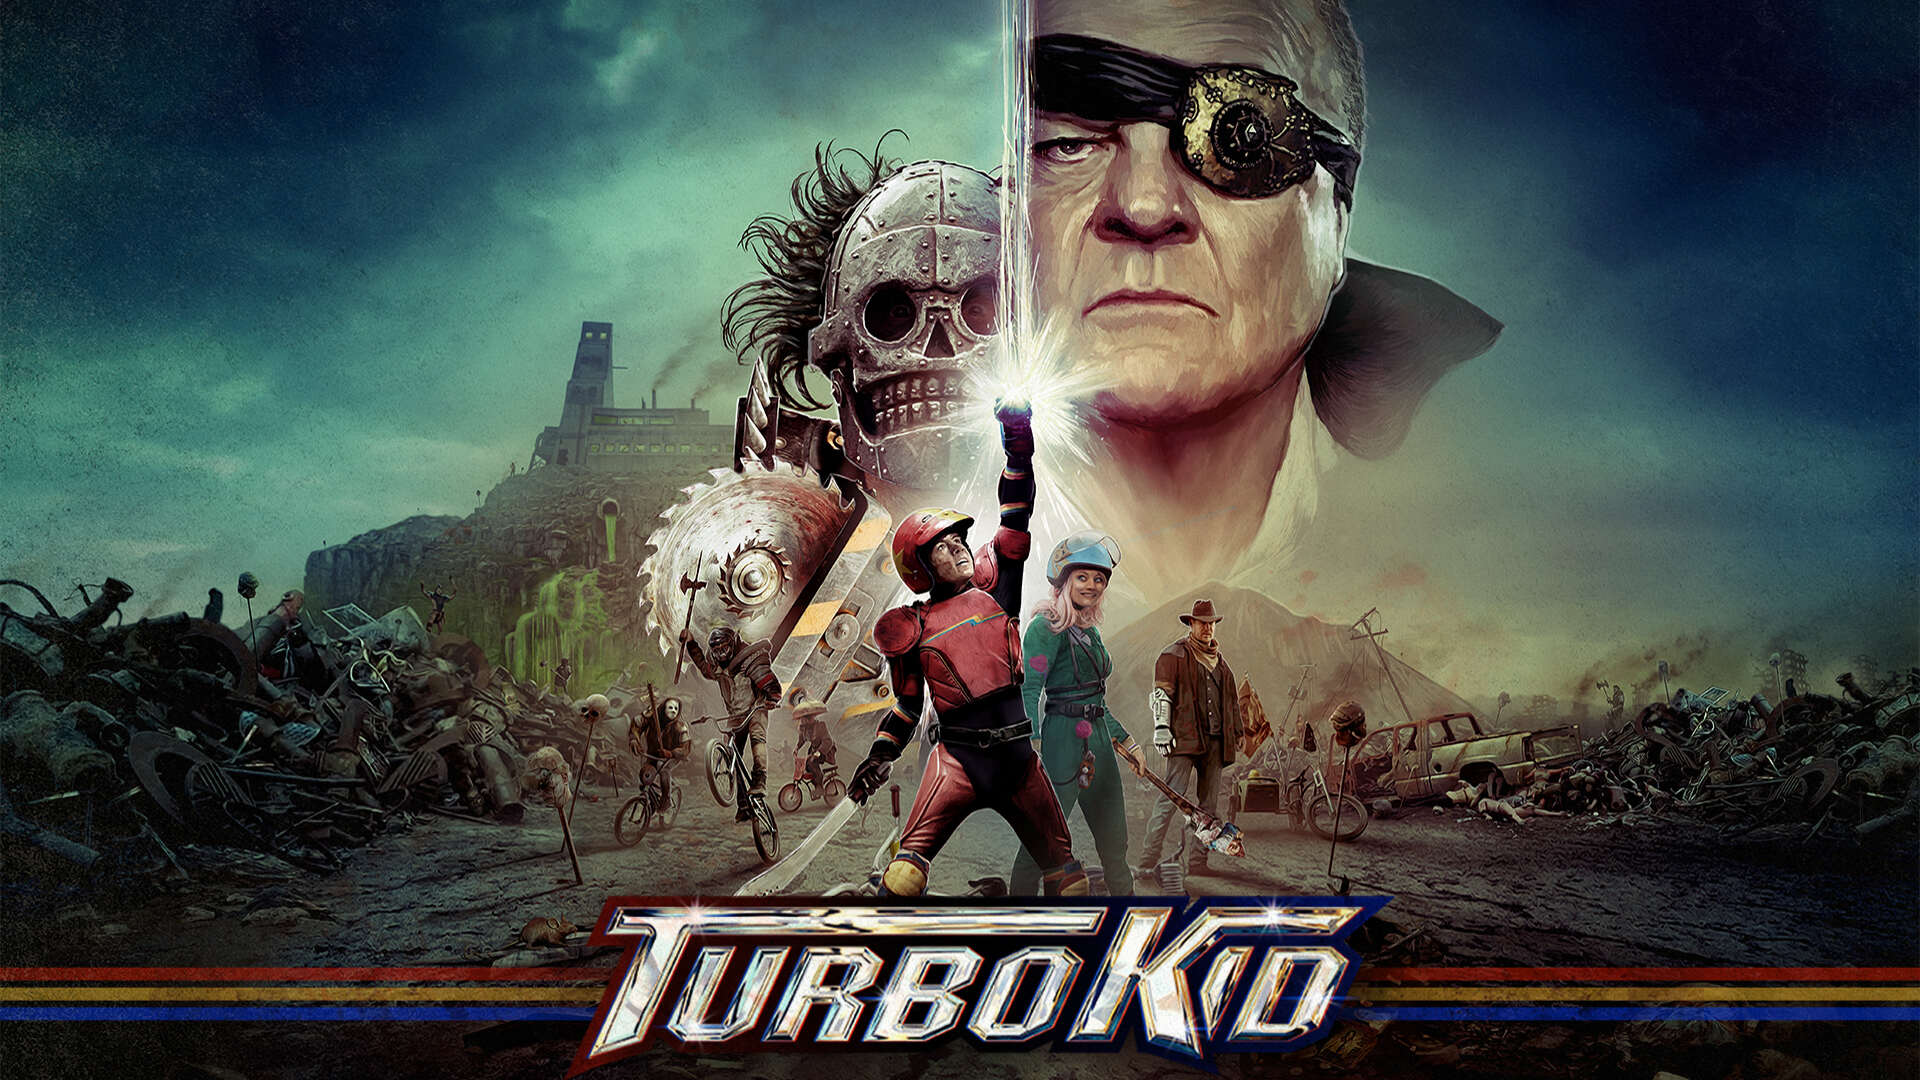 33-facts-about-the-movie-turbo-kid